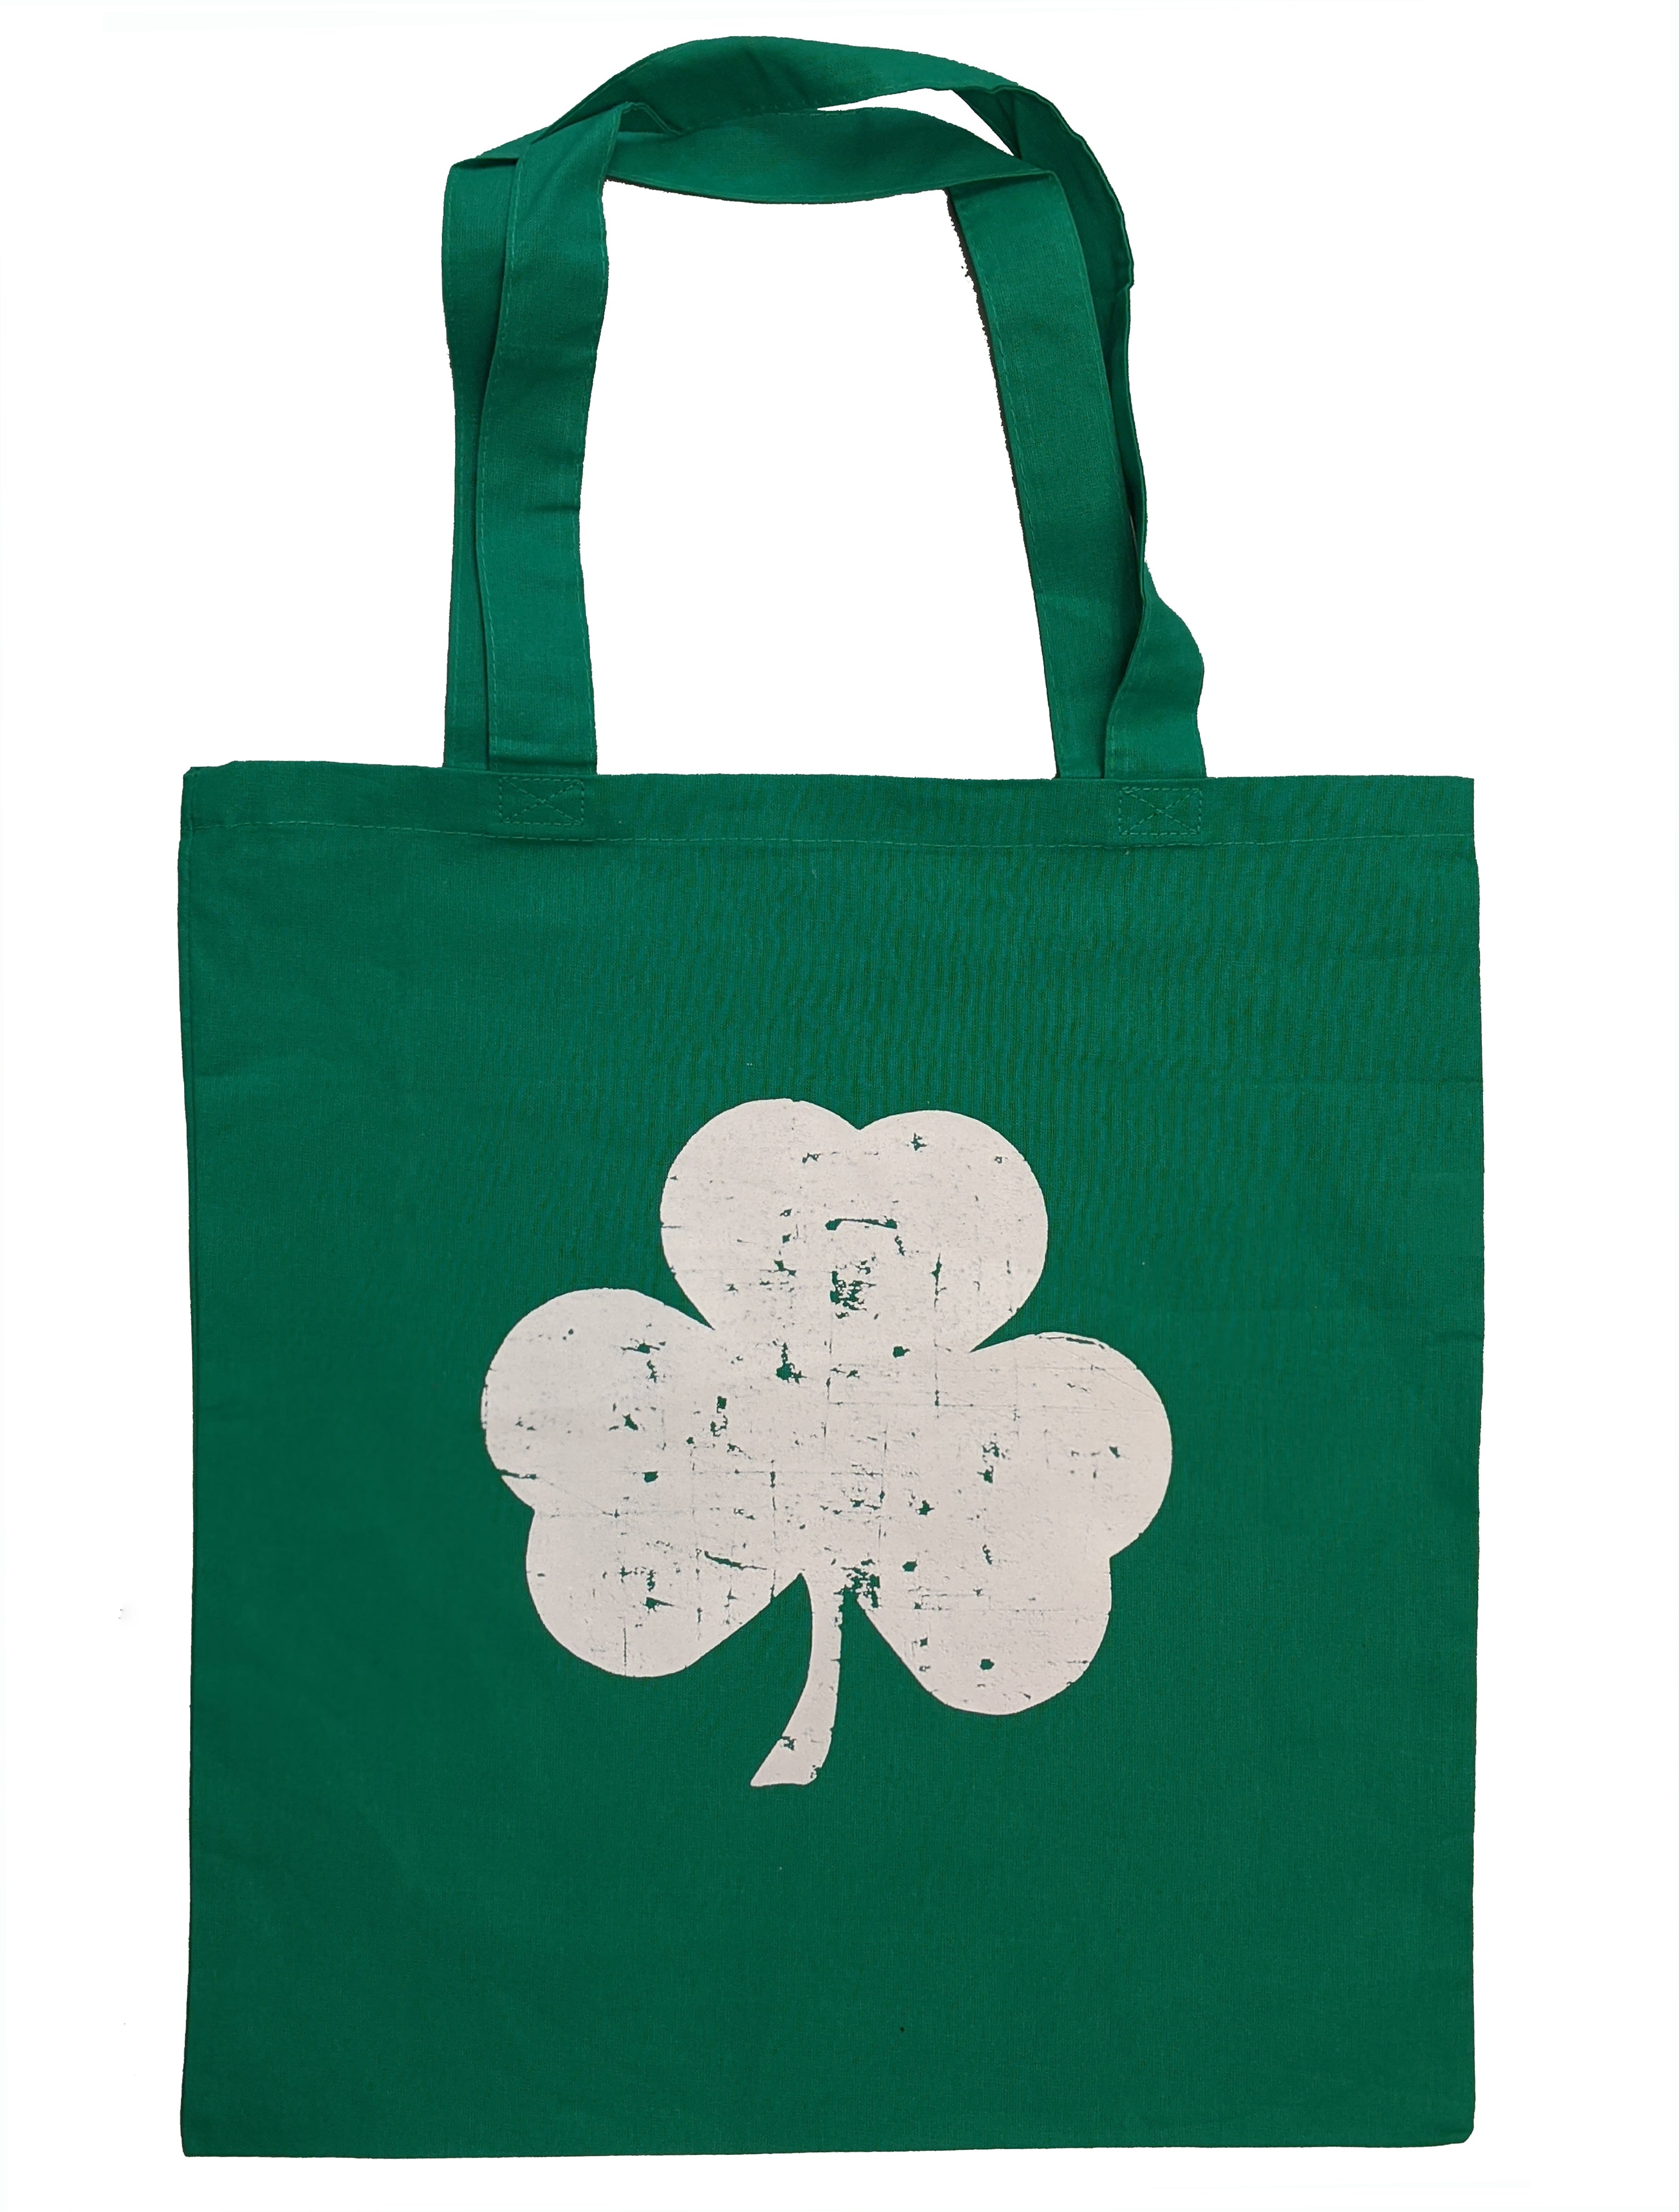 Spend $25 - Get a FREE St Patricks Day 100% Cotton Canvas Tote Bag